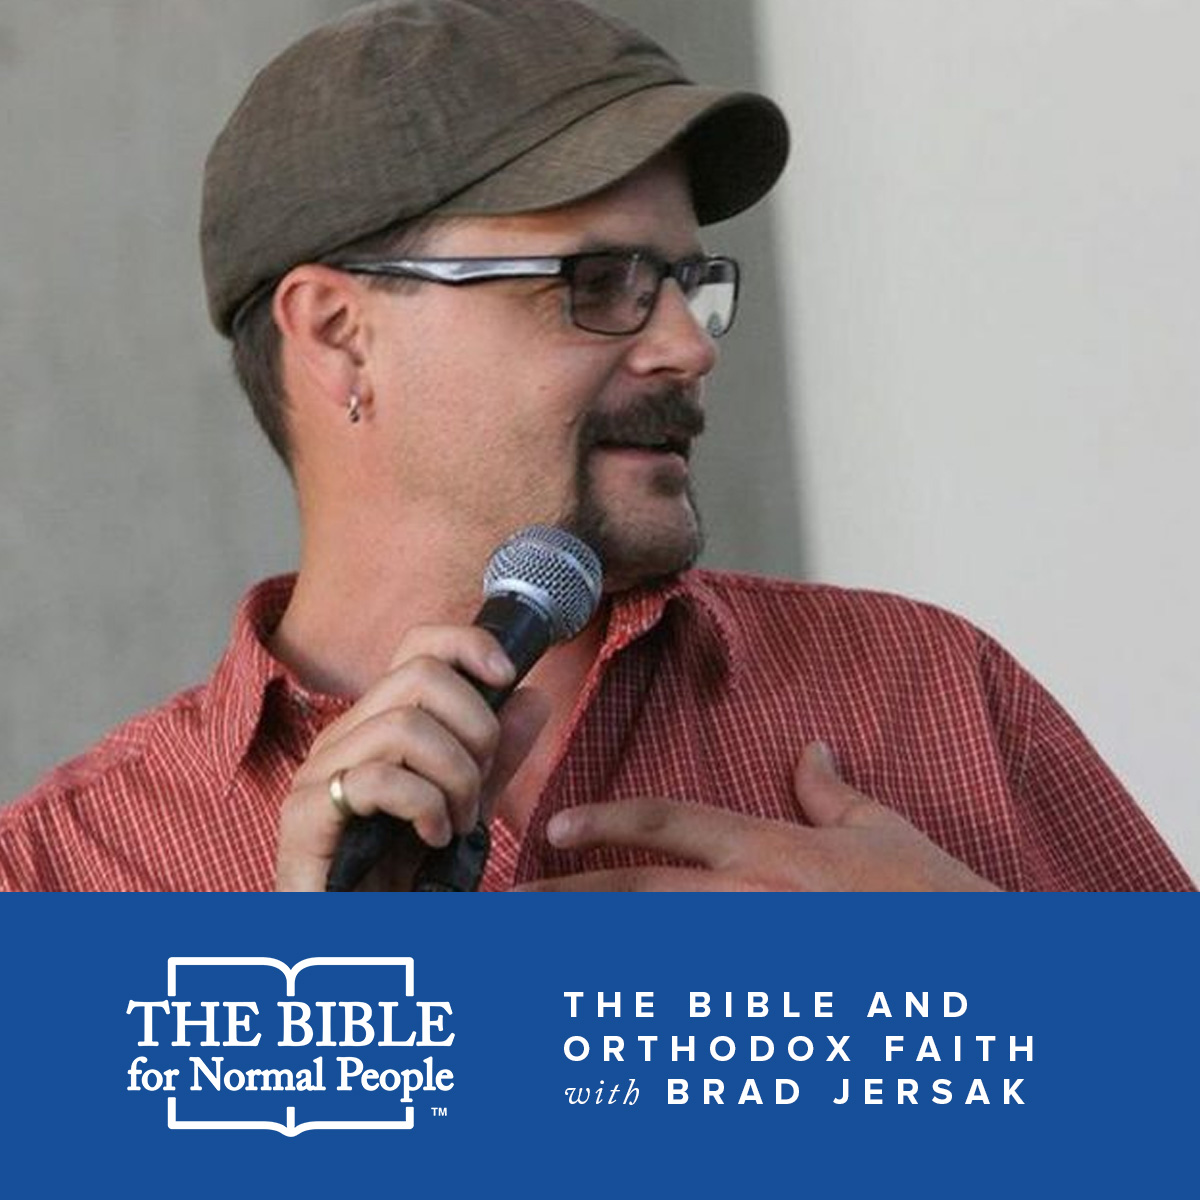 The Bible and Orthodox Faith with Brad Jersak